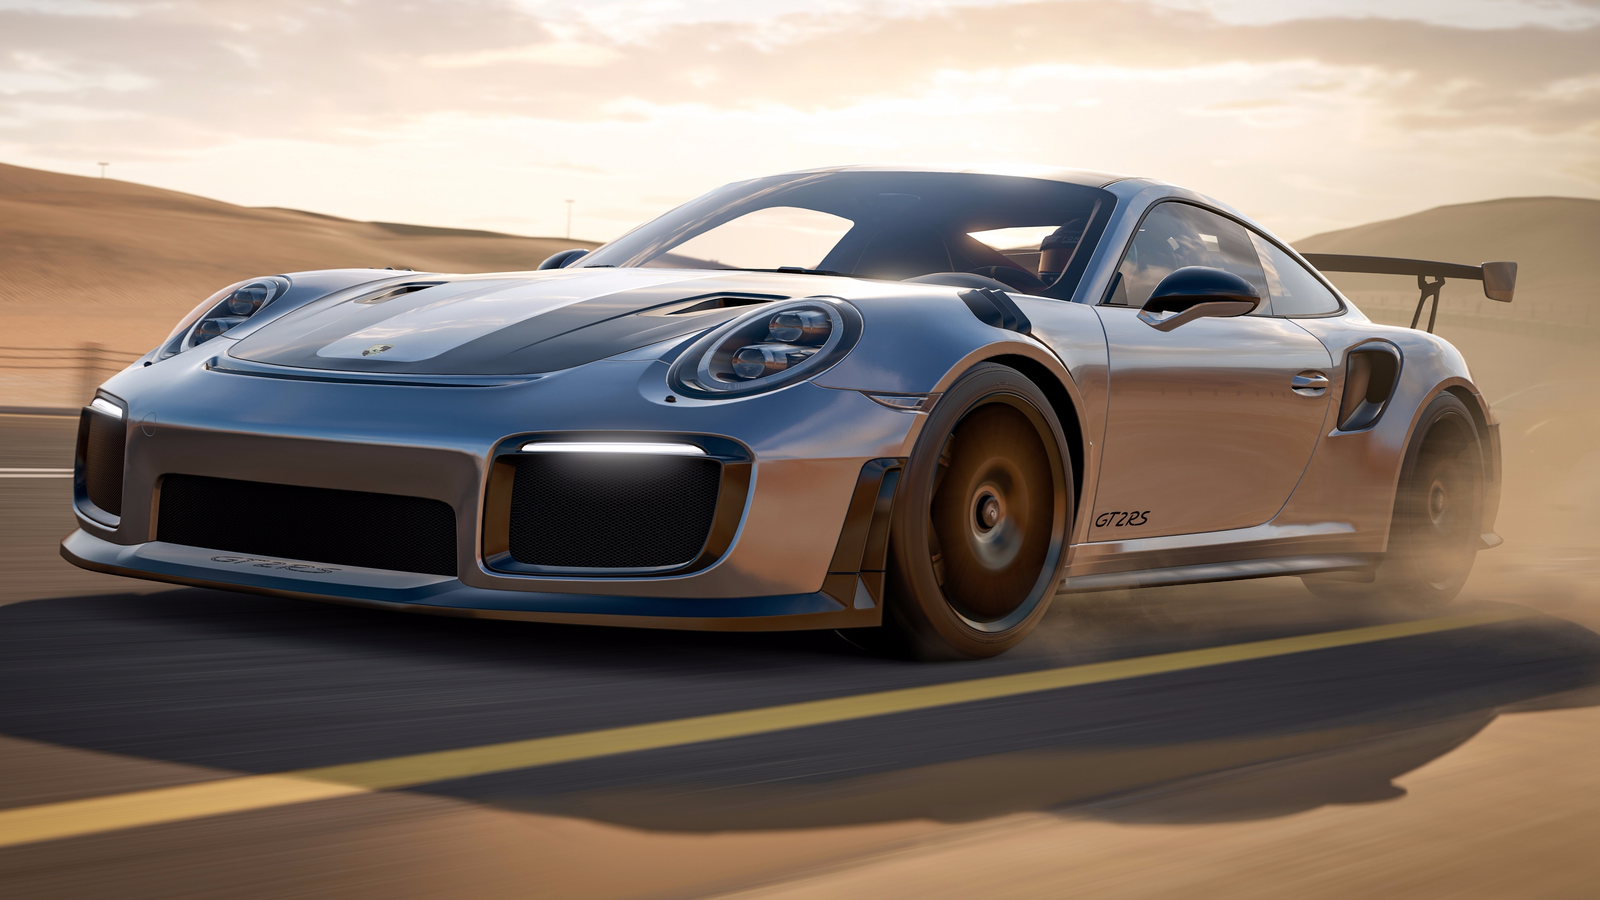 Forza Motorsport 7 is leaving the Microsoft Store – Forza Support